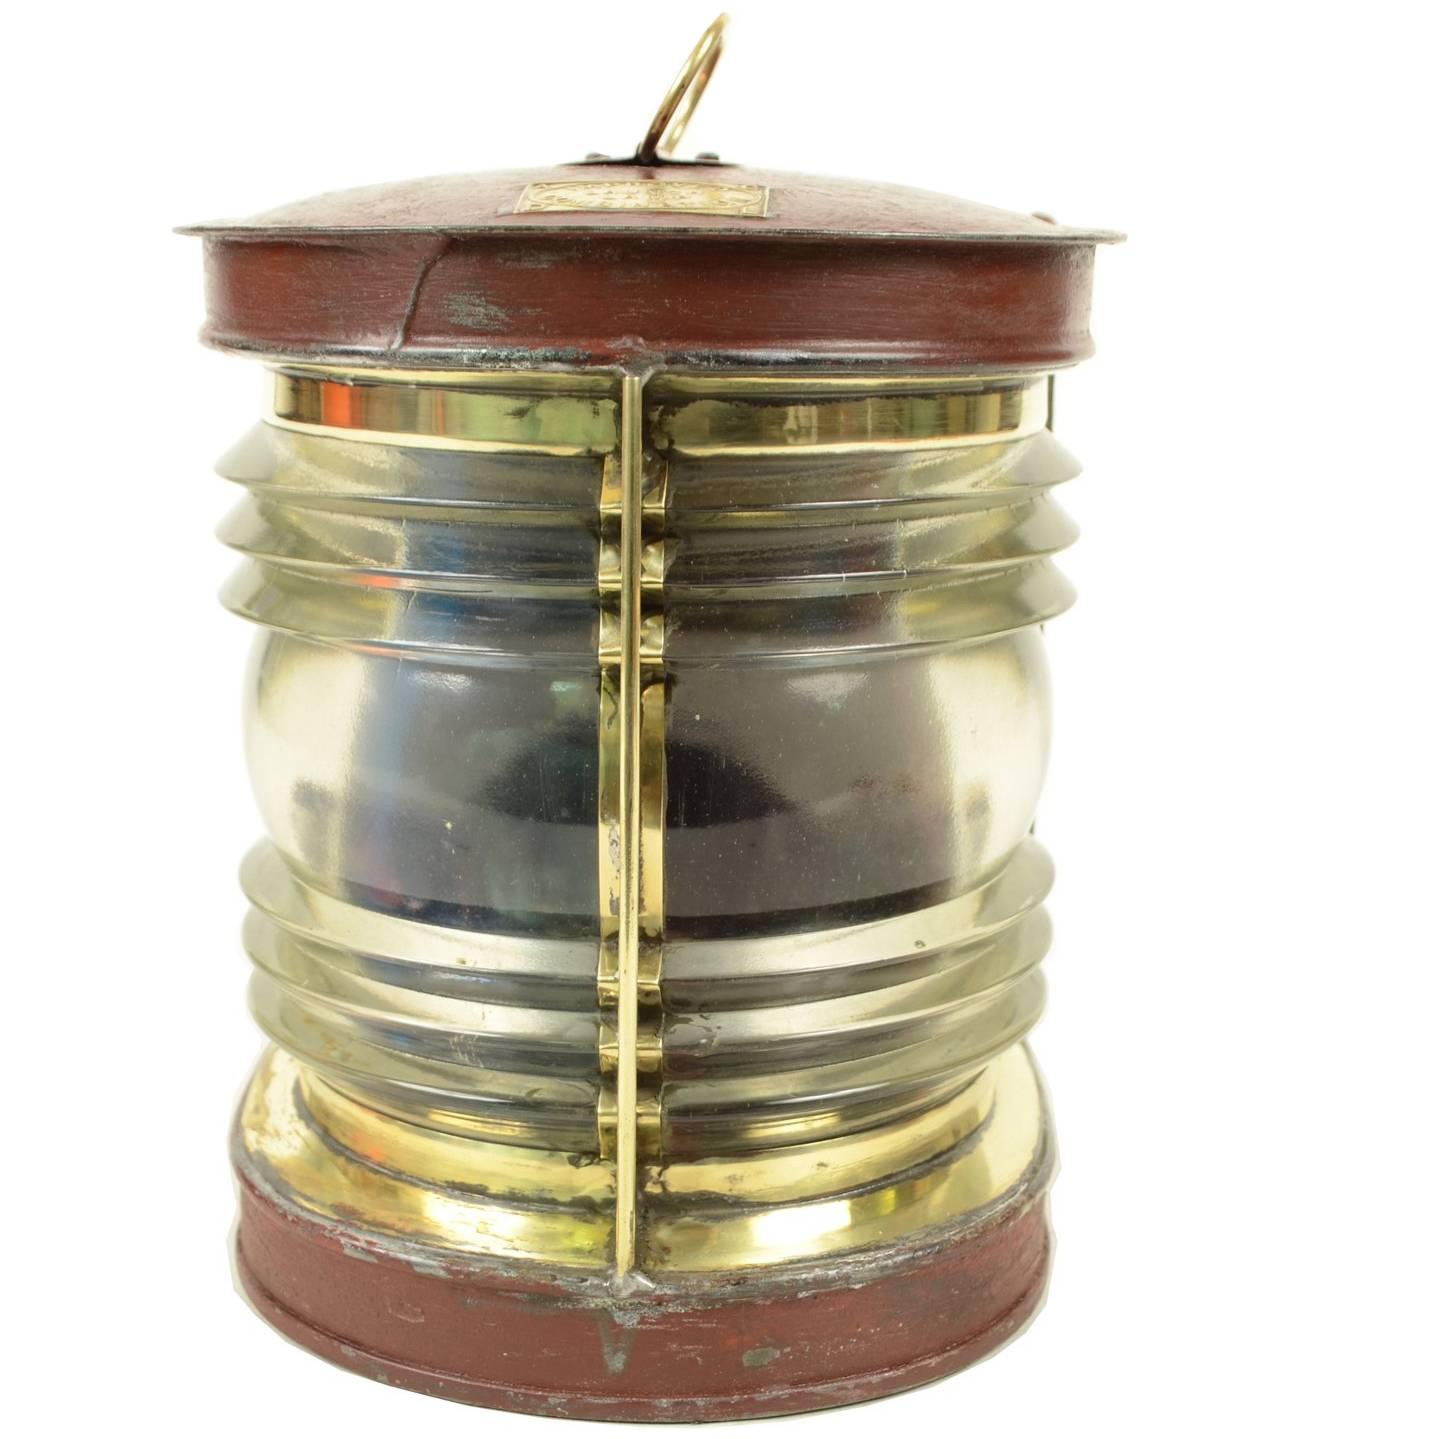 Lamp with green and red light, iron, glass and brass signed improved launch lamp combination. It has an oil lamp inside; English manufacture of the early 1900. Very good condition. Cm 16.5 x 17.5 x 19.5 (H).
Shipping is insured by Lloyd's London;